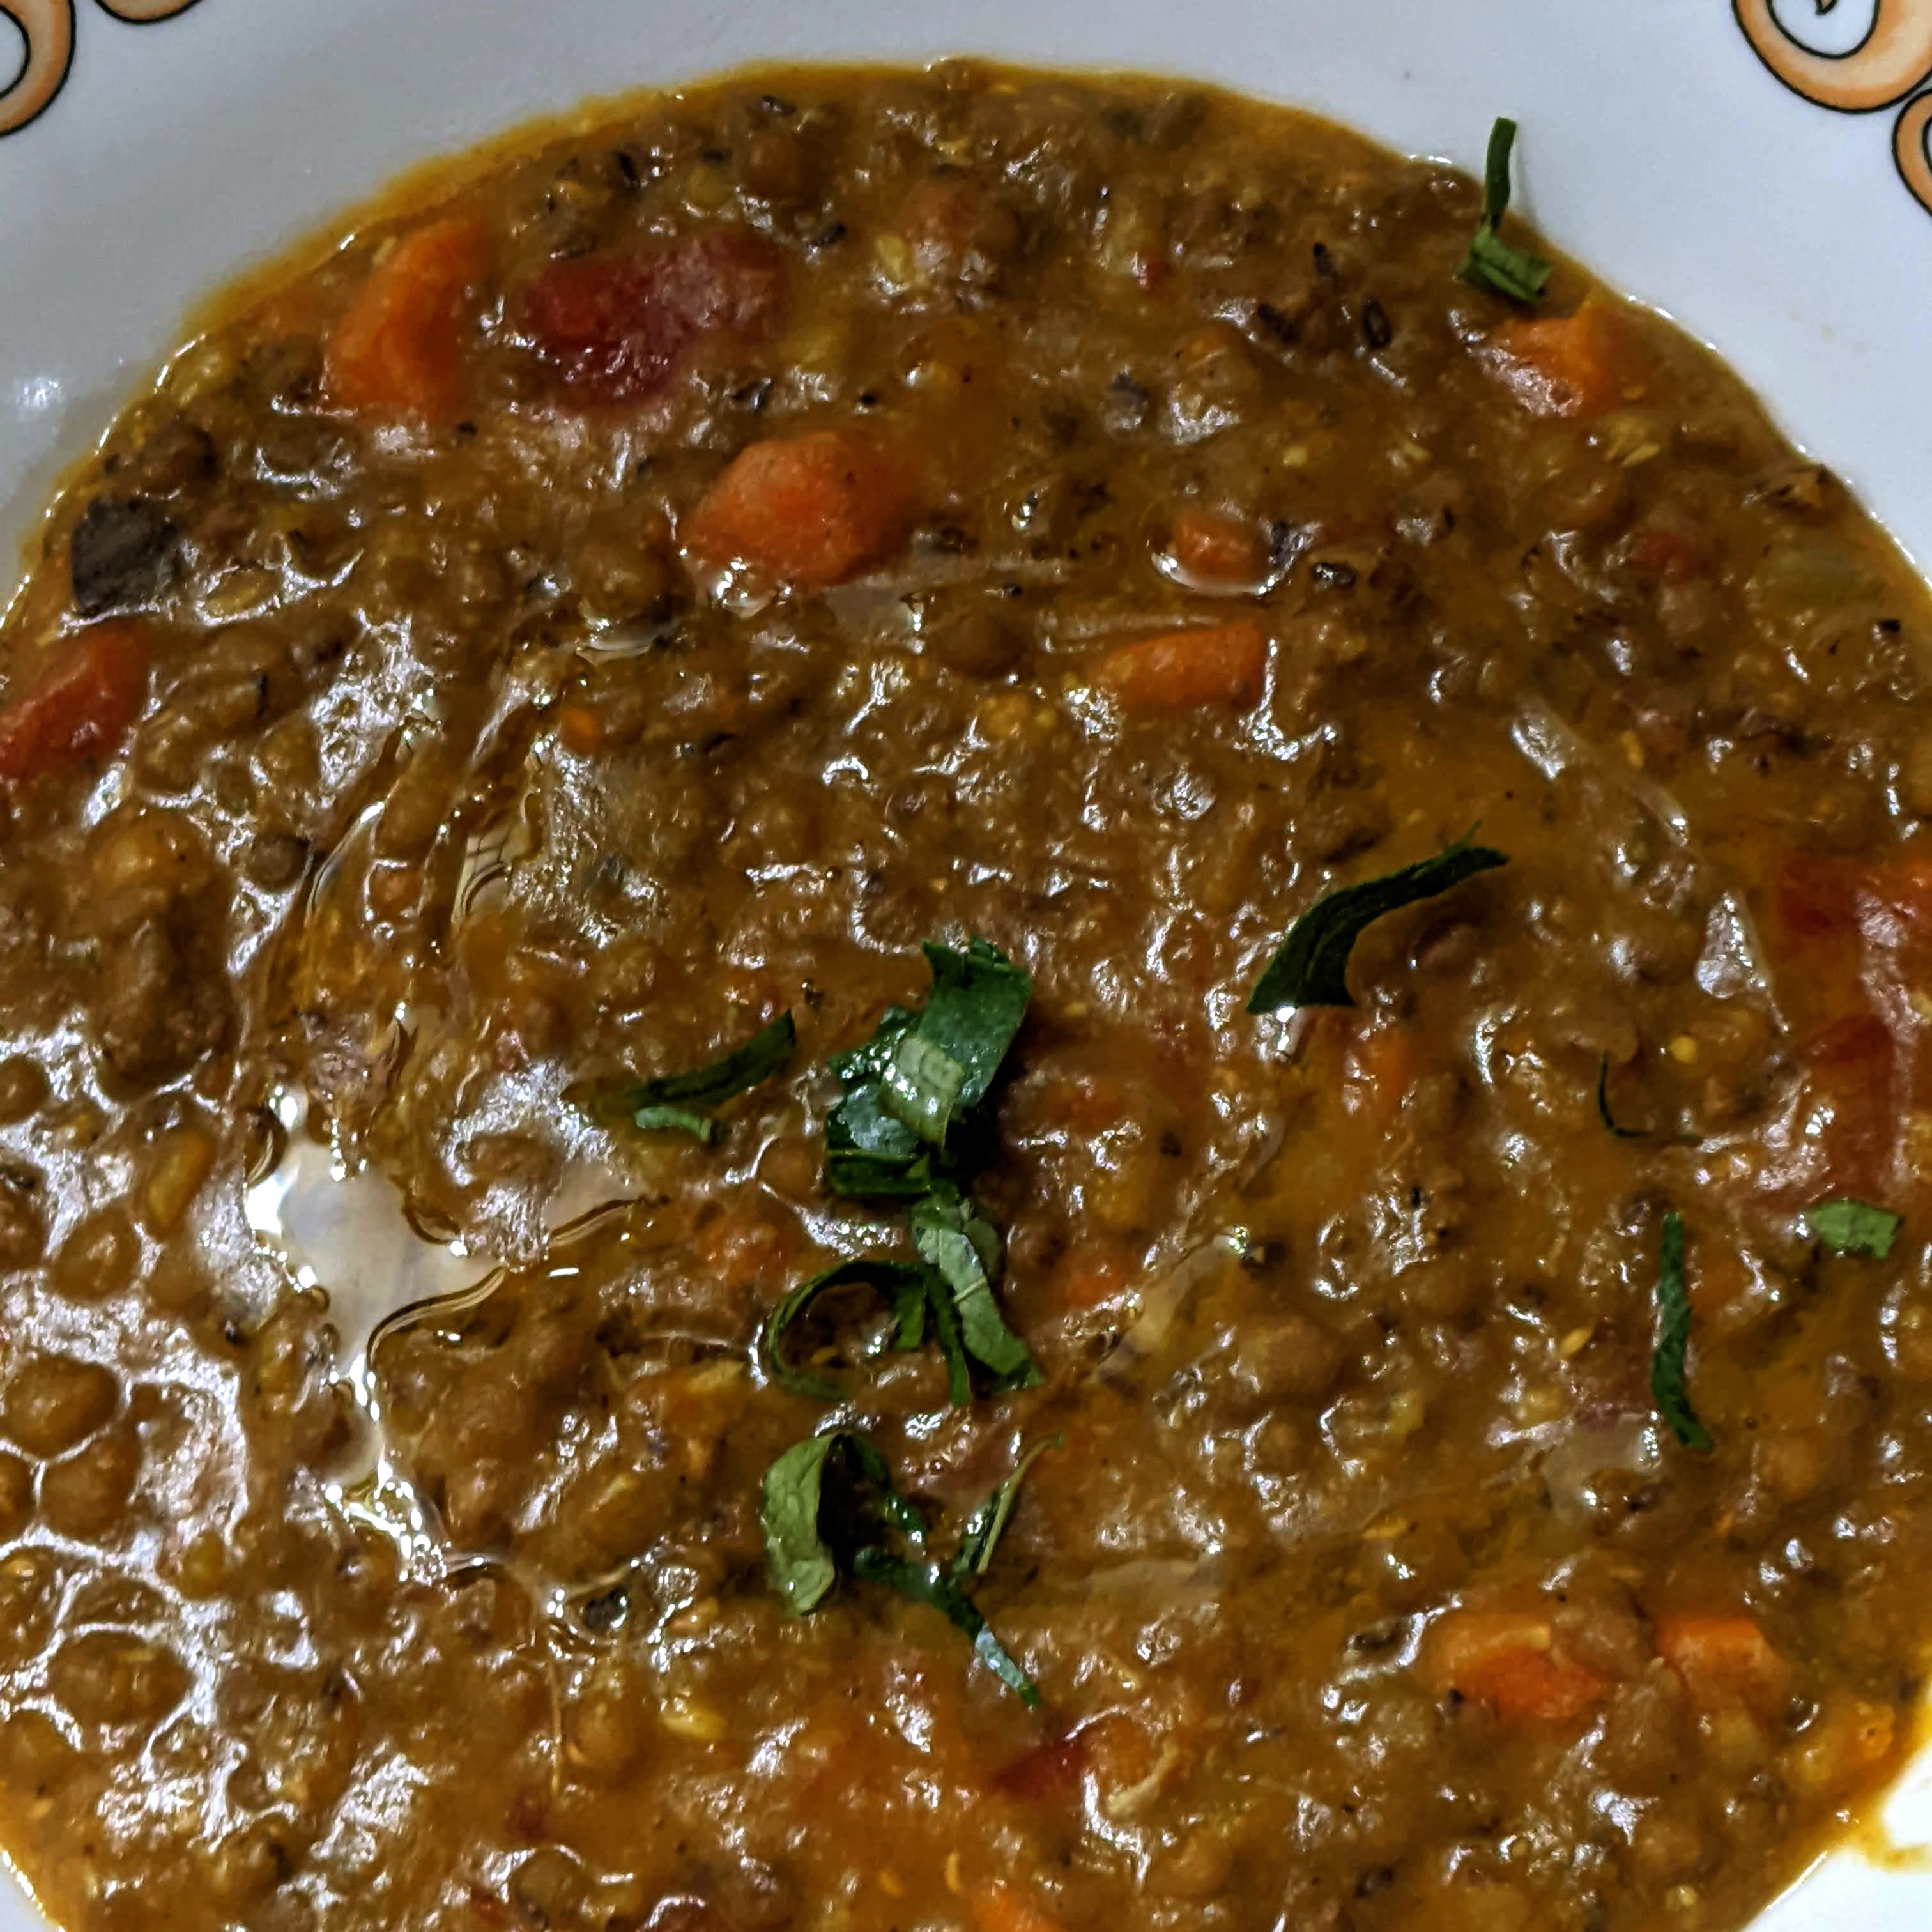 Lamb recipe 3; protein rich soup mung bean soup curry style